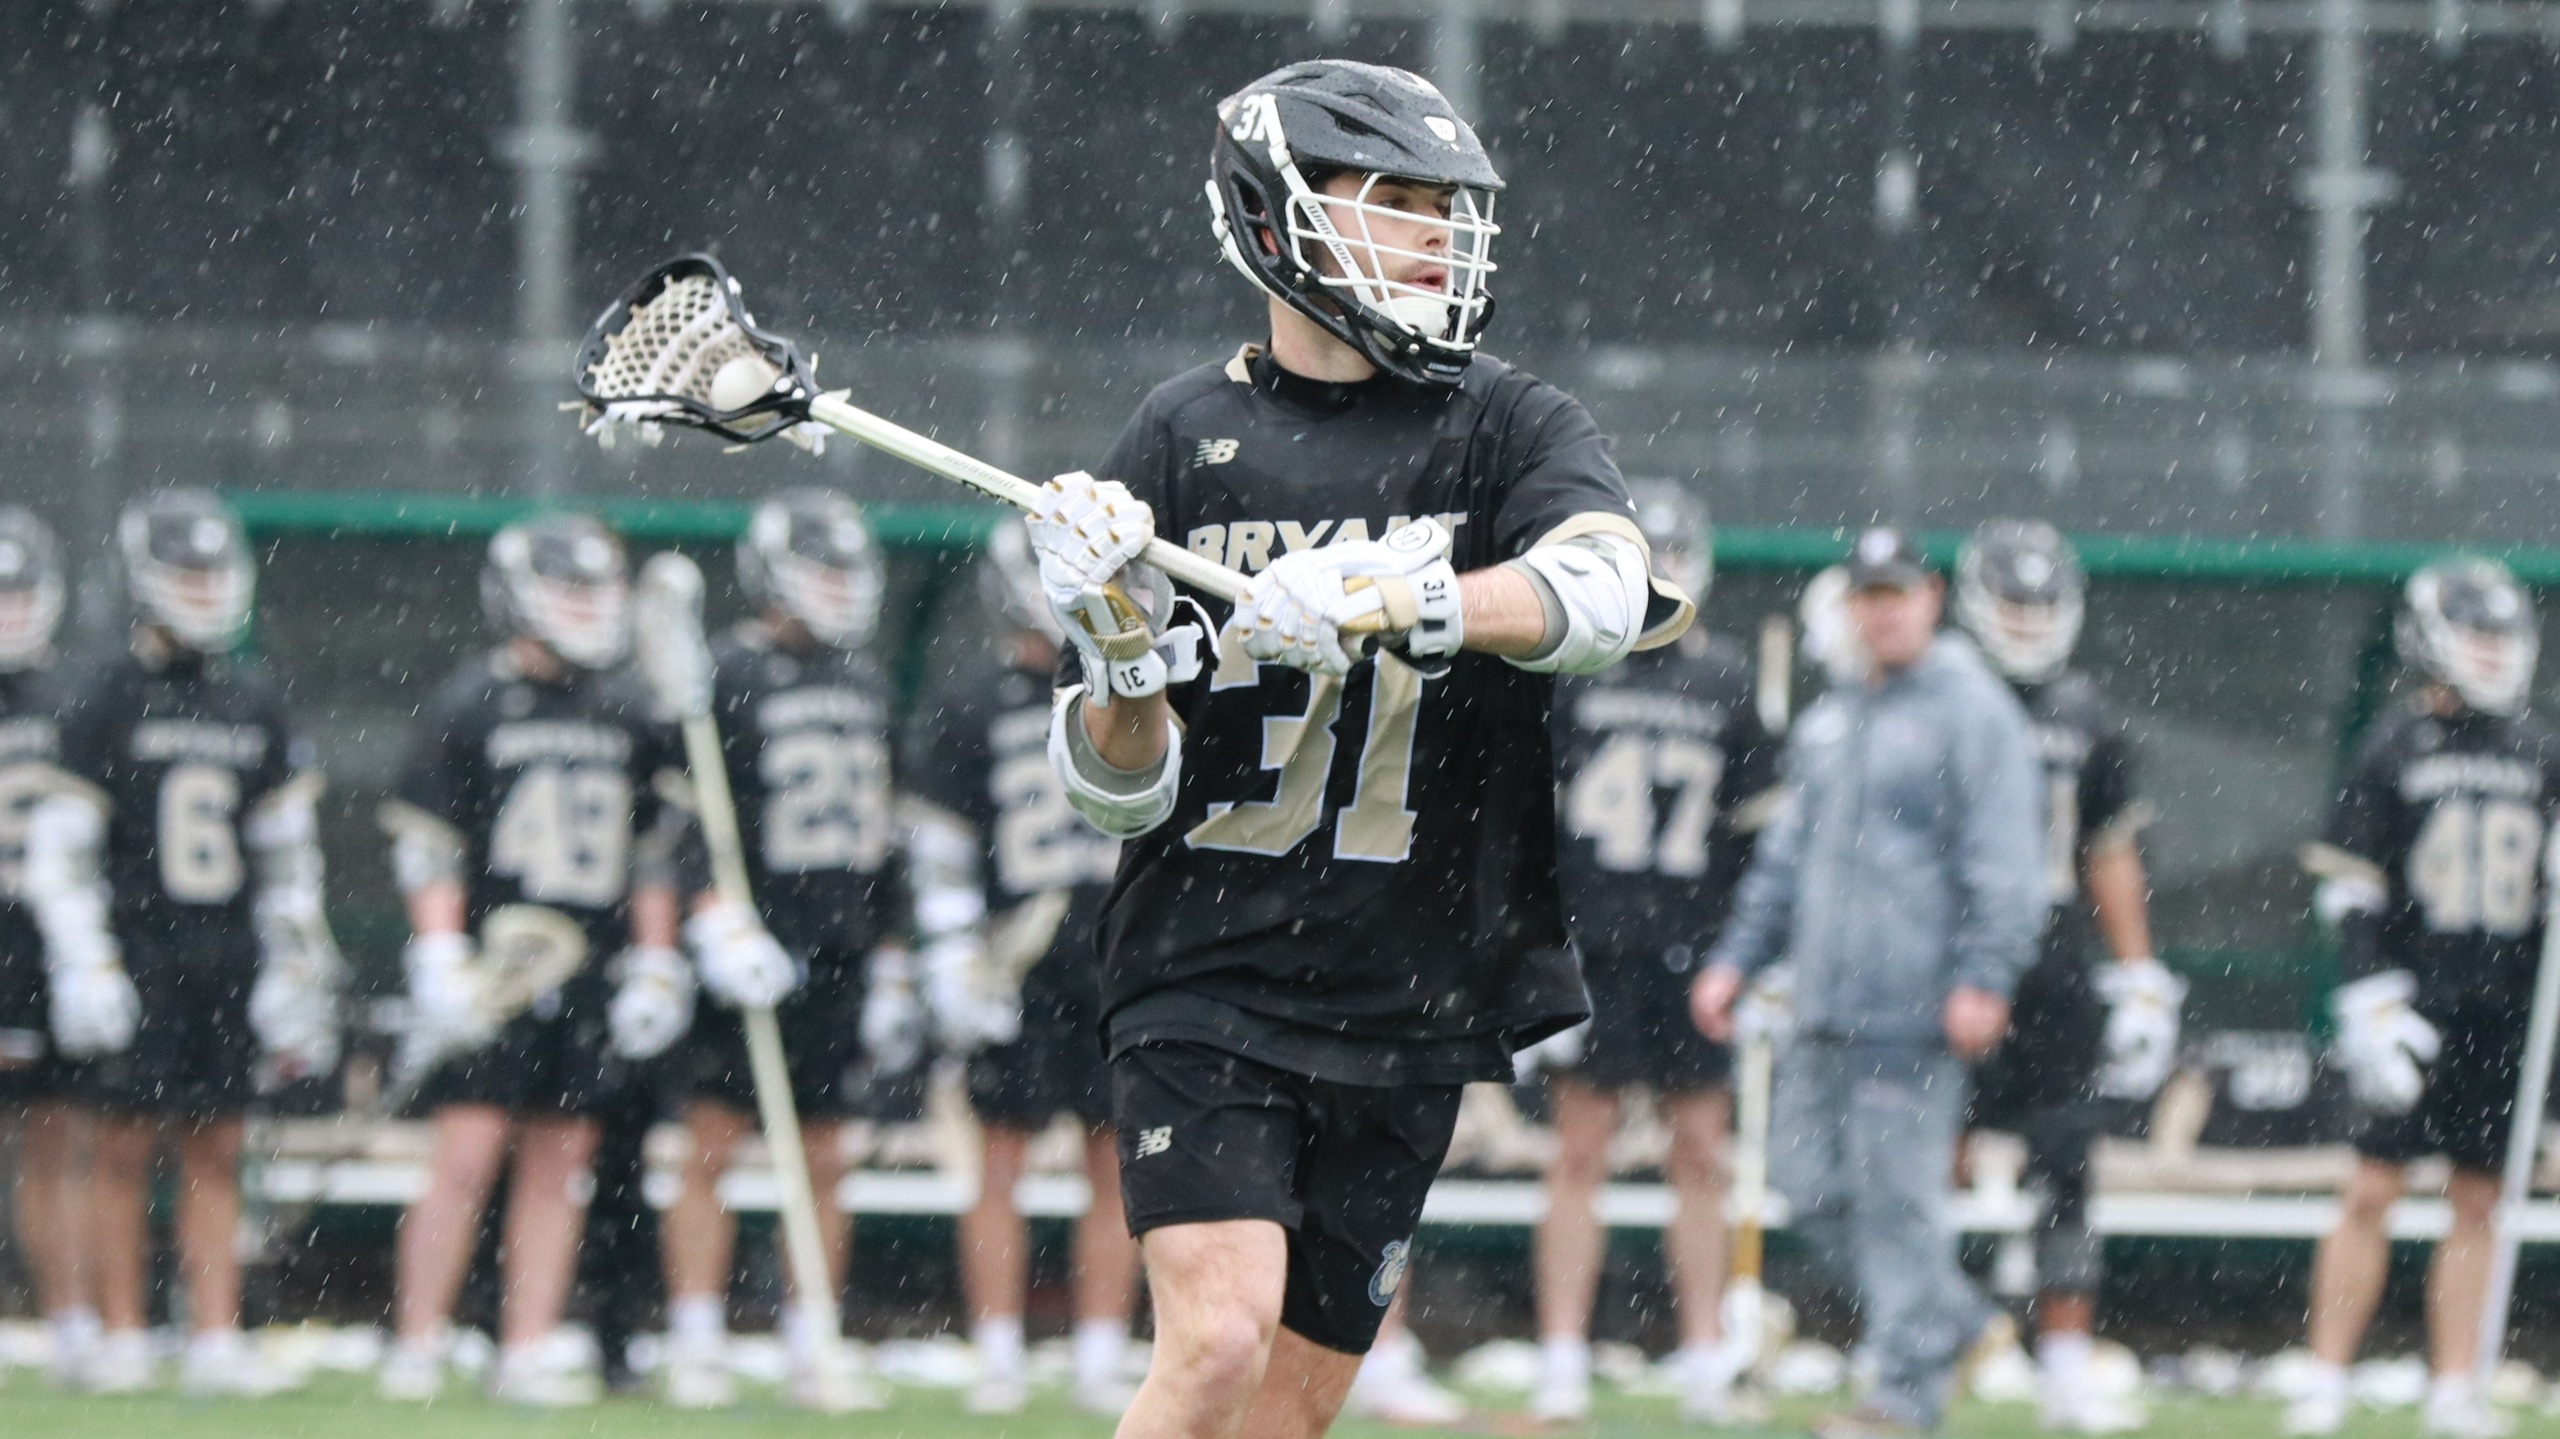 Men's Lacrosse hosts Vermont on Saturday afternoon